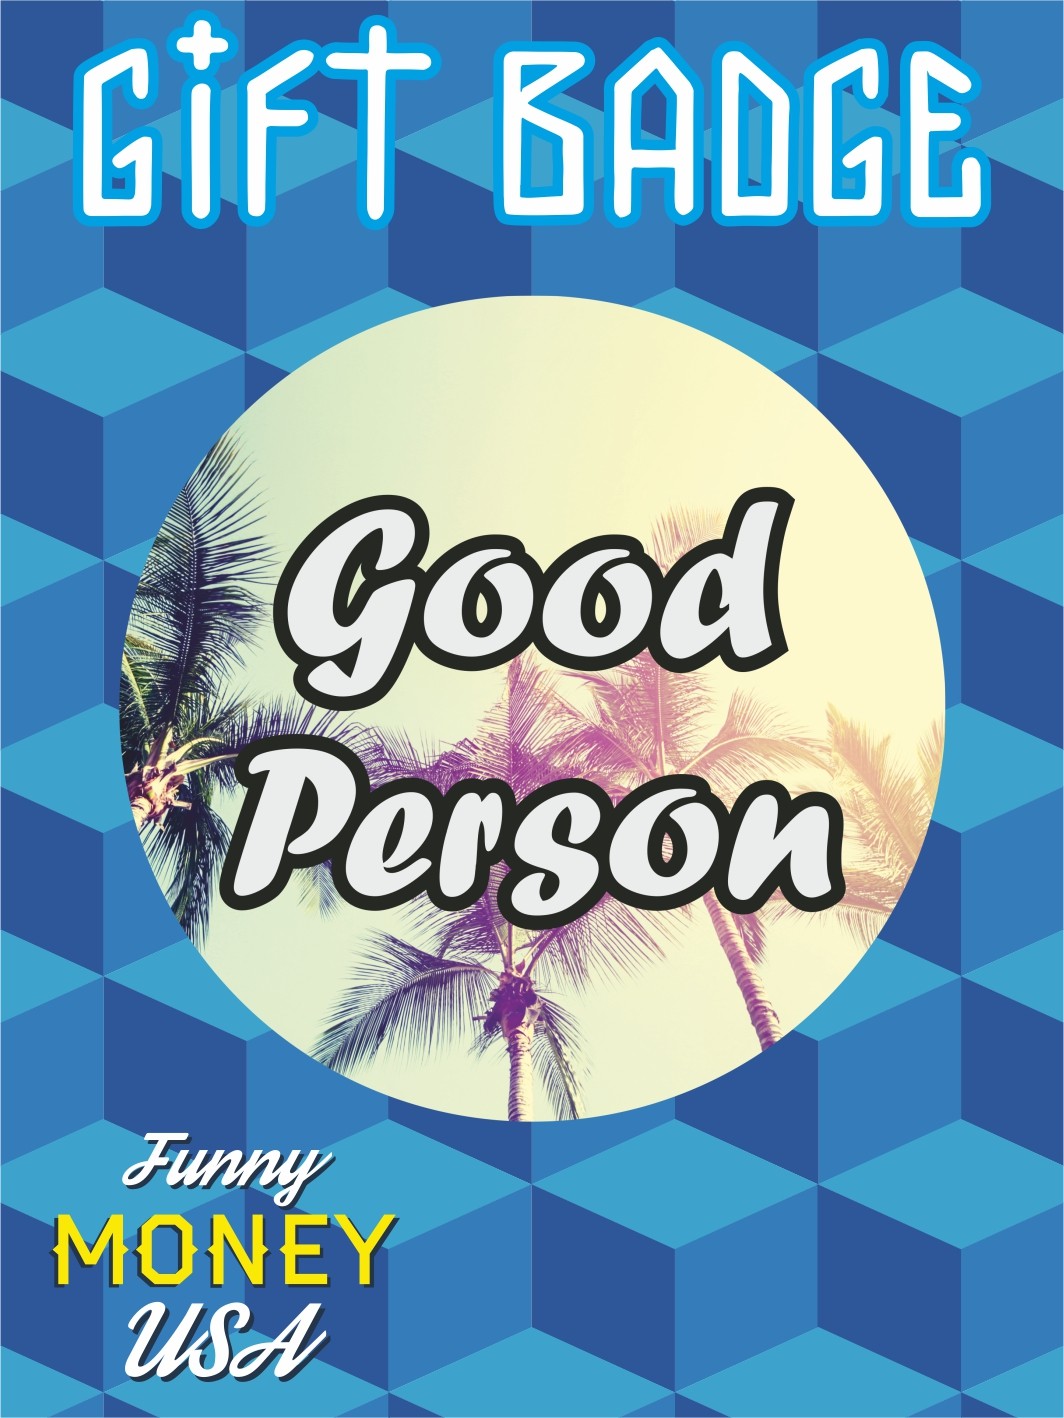 Gift badges "Good person"